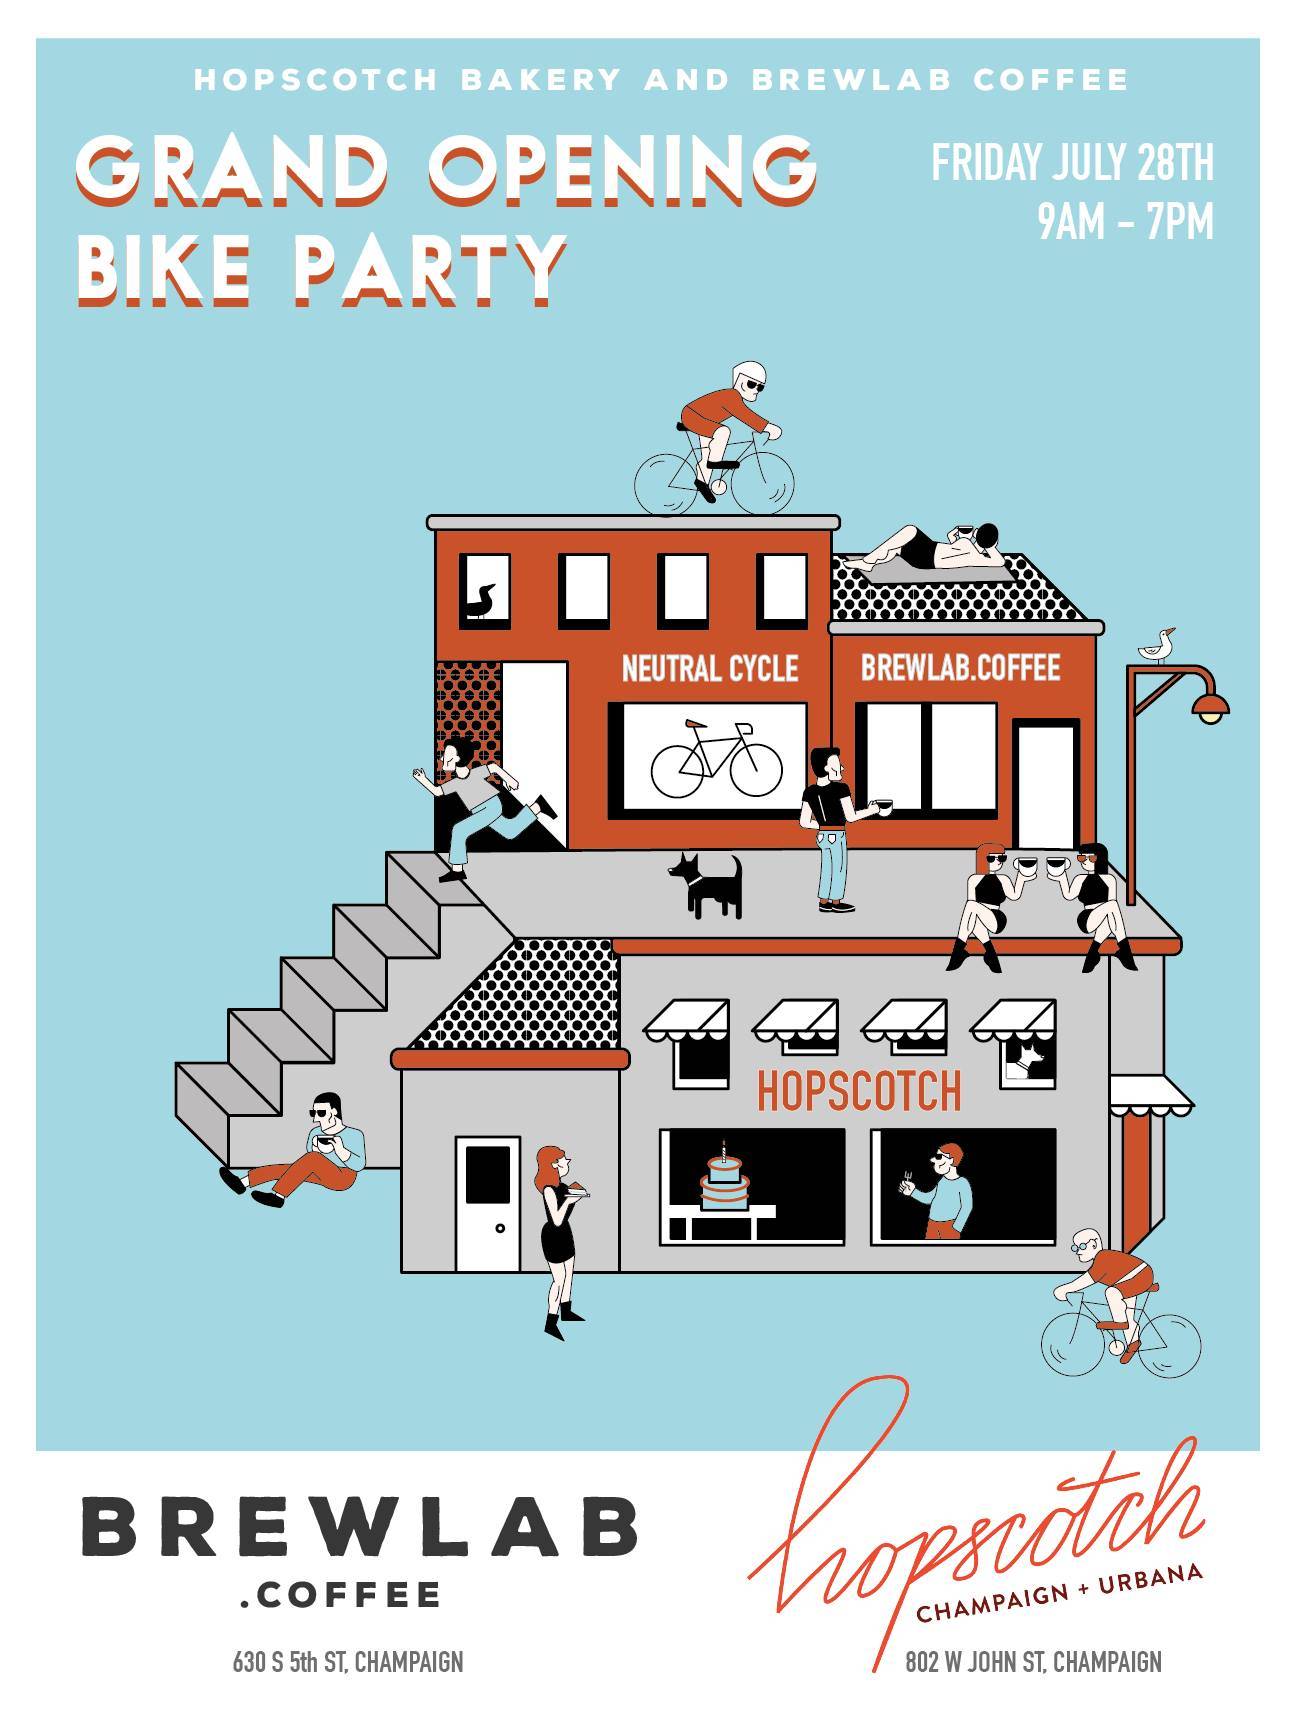 Brewlab Coffee and Hopscotch Bakery hosting grand opening bike party this Friday